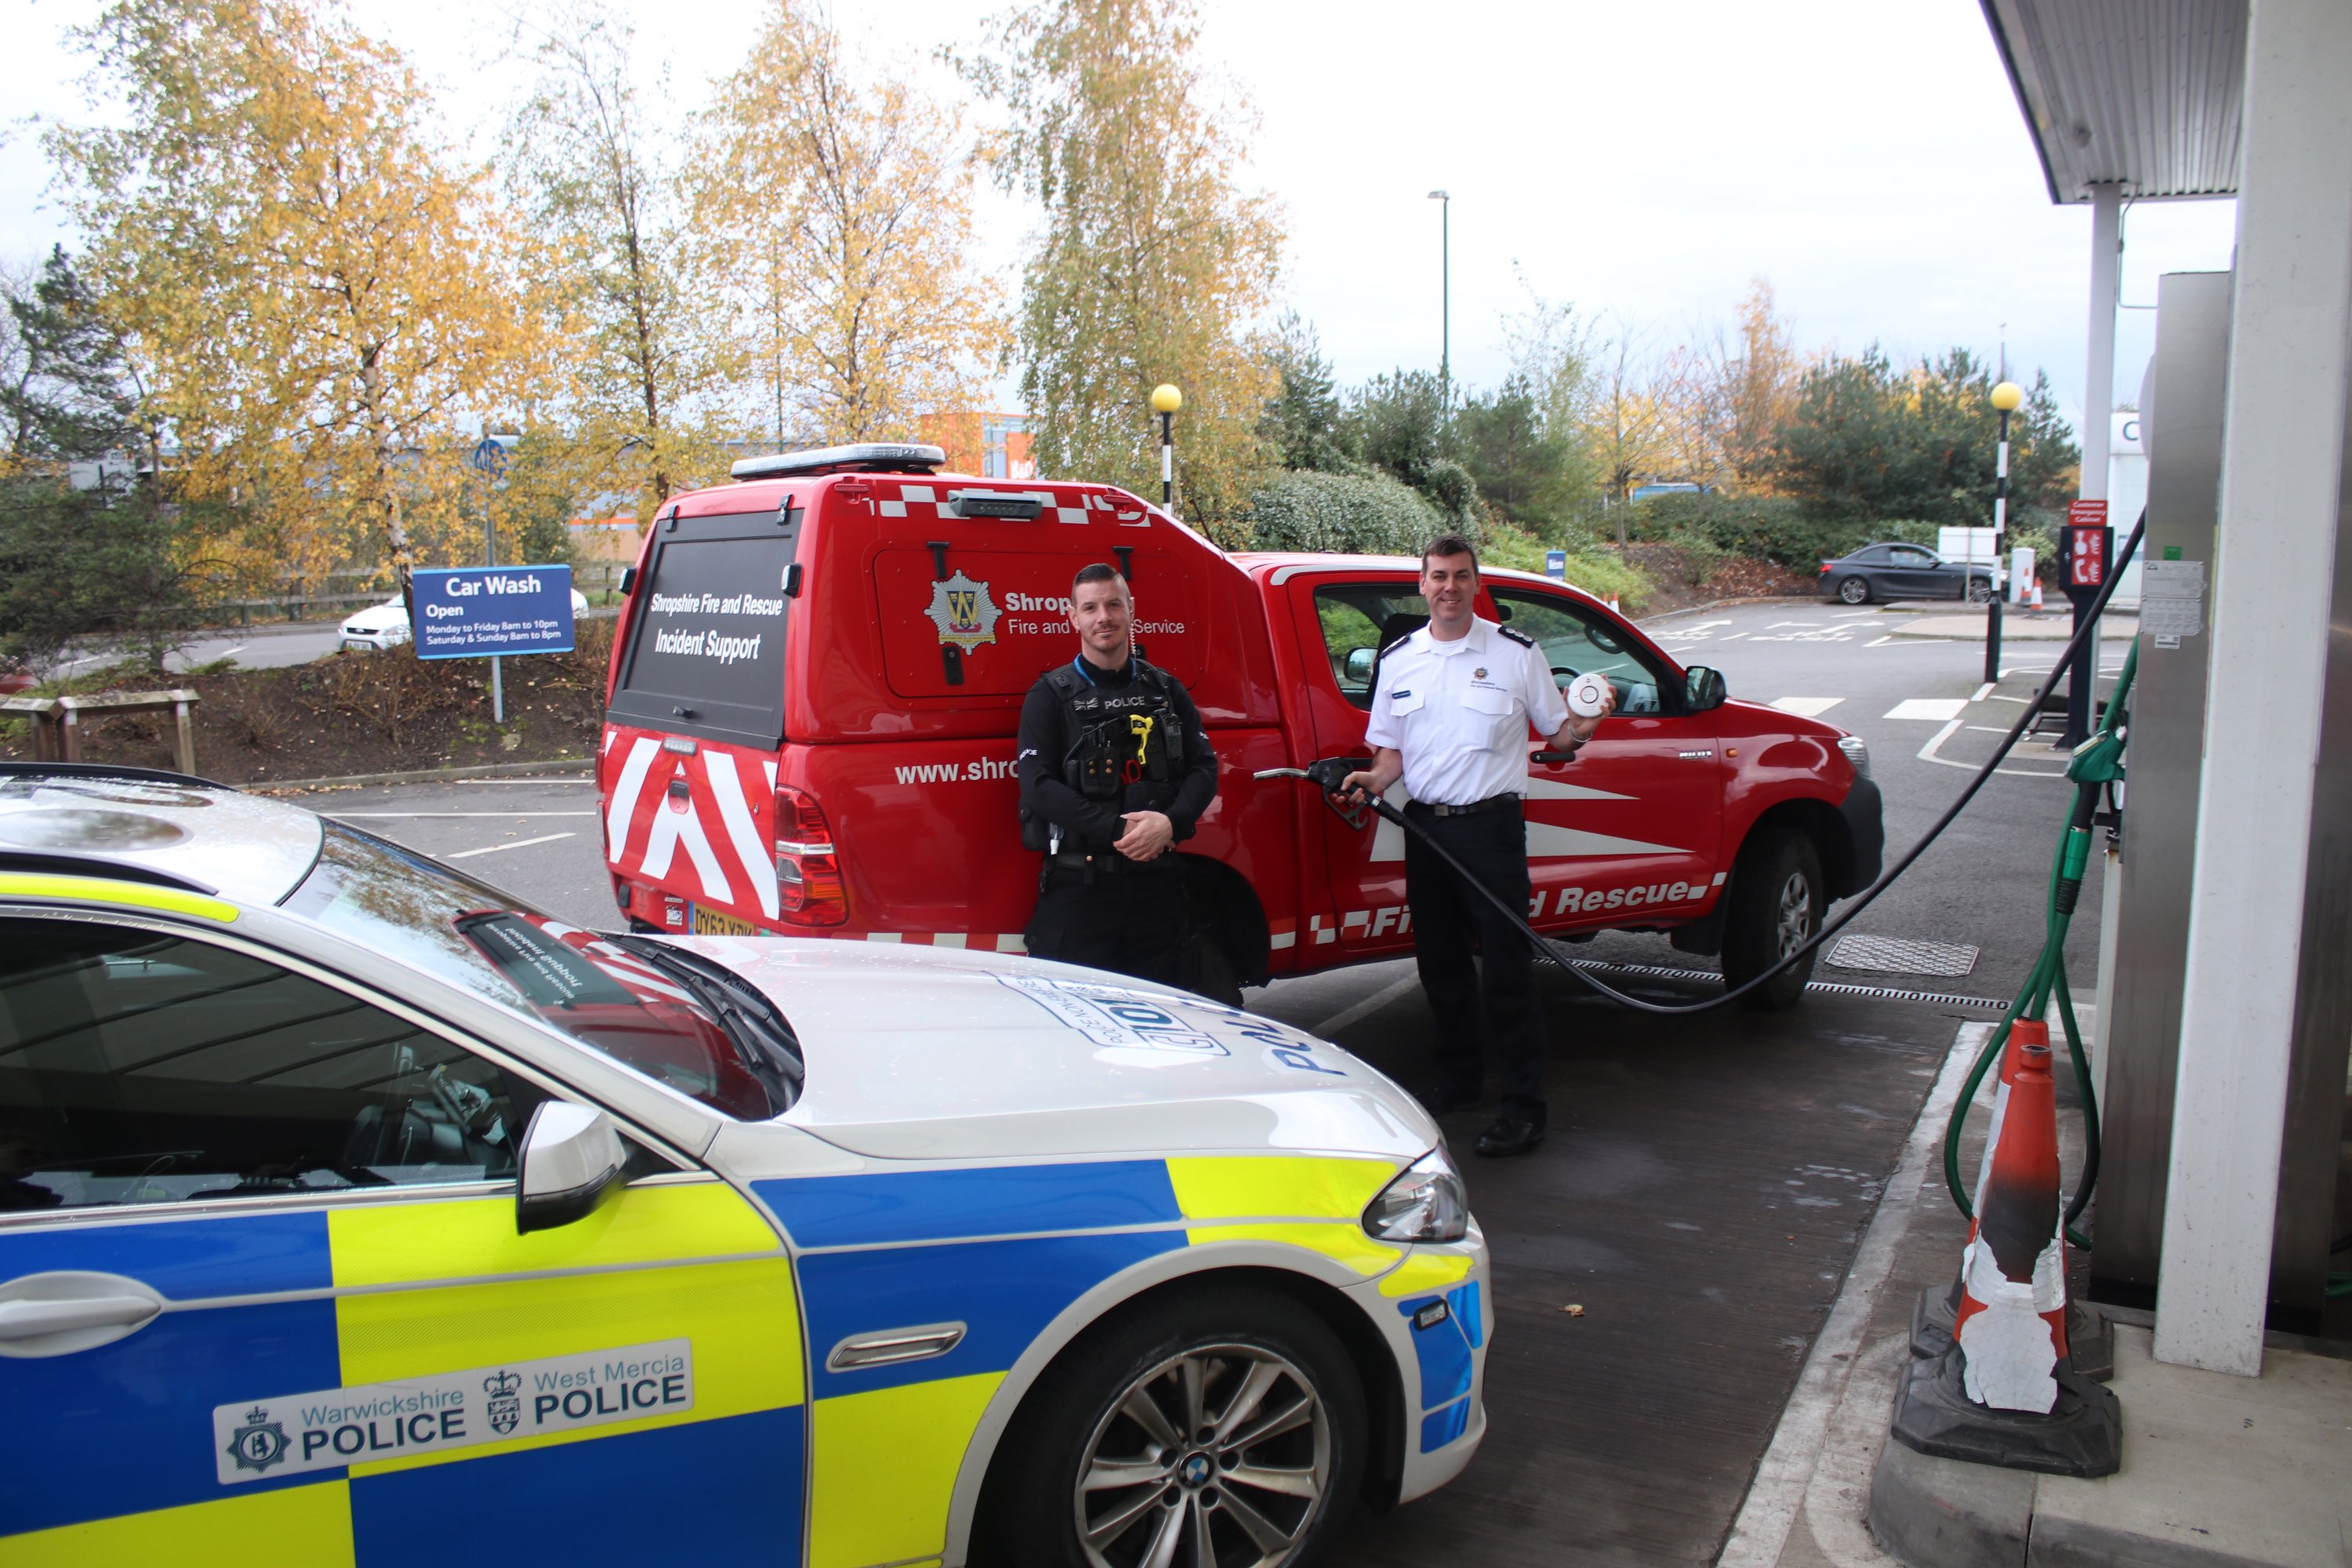 Station Manager James Bainbridge and PC Richard Bramwell launch a joint fire and police safety awareness campaign at the petrol pumps as part of Road Safety Week 2017